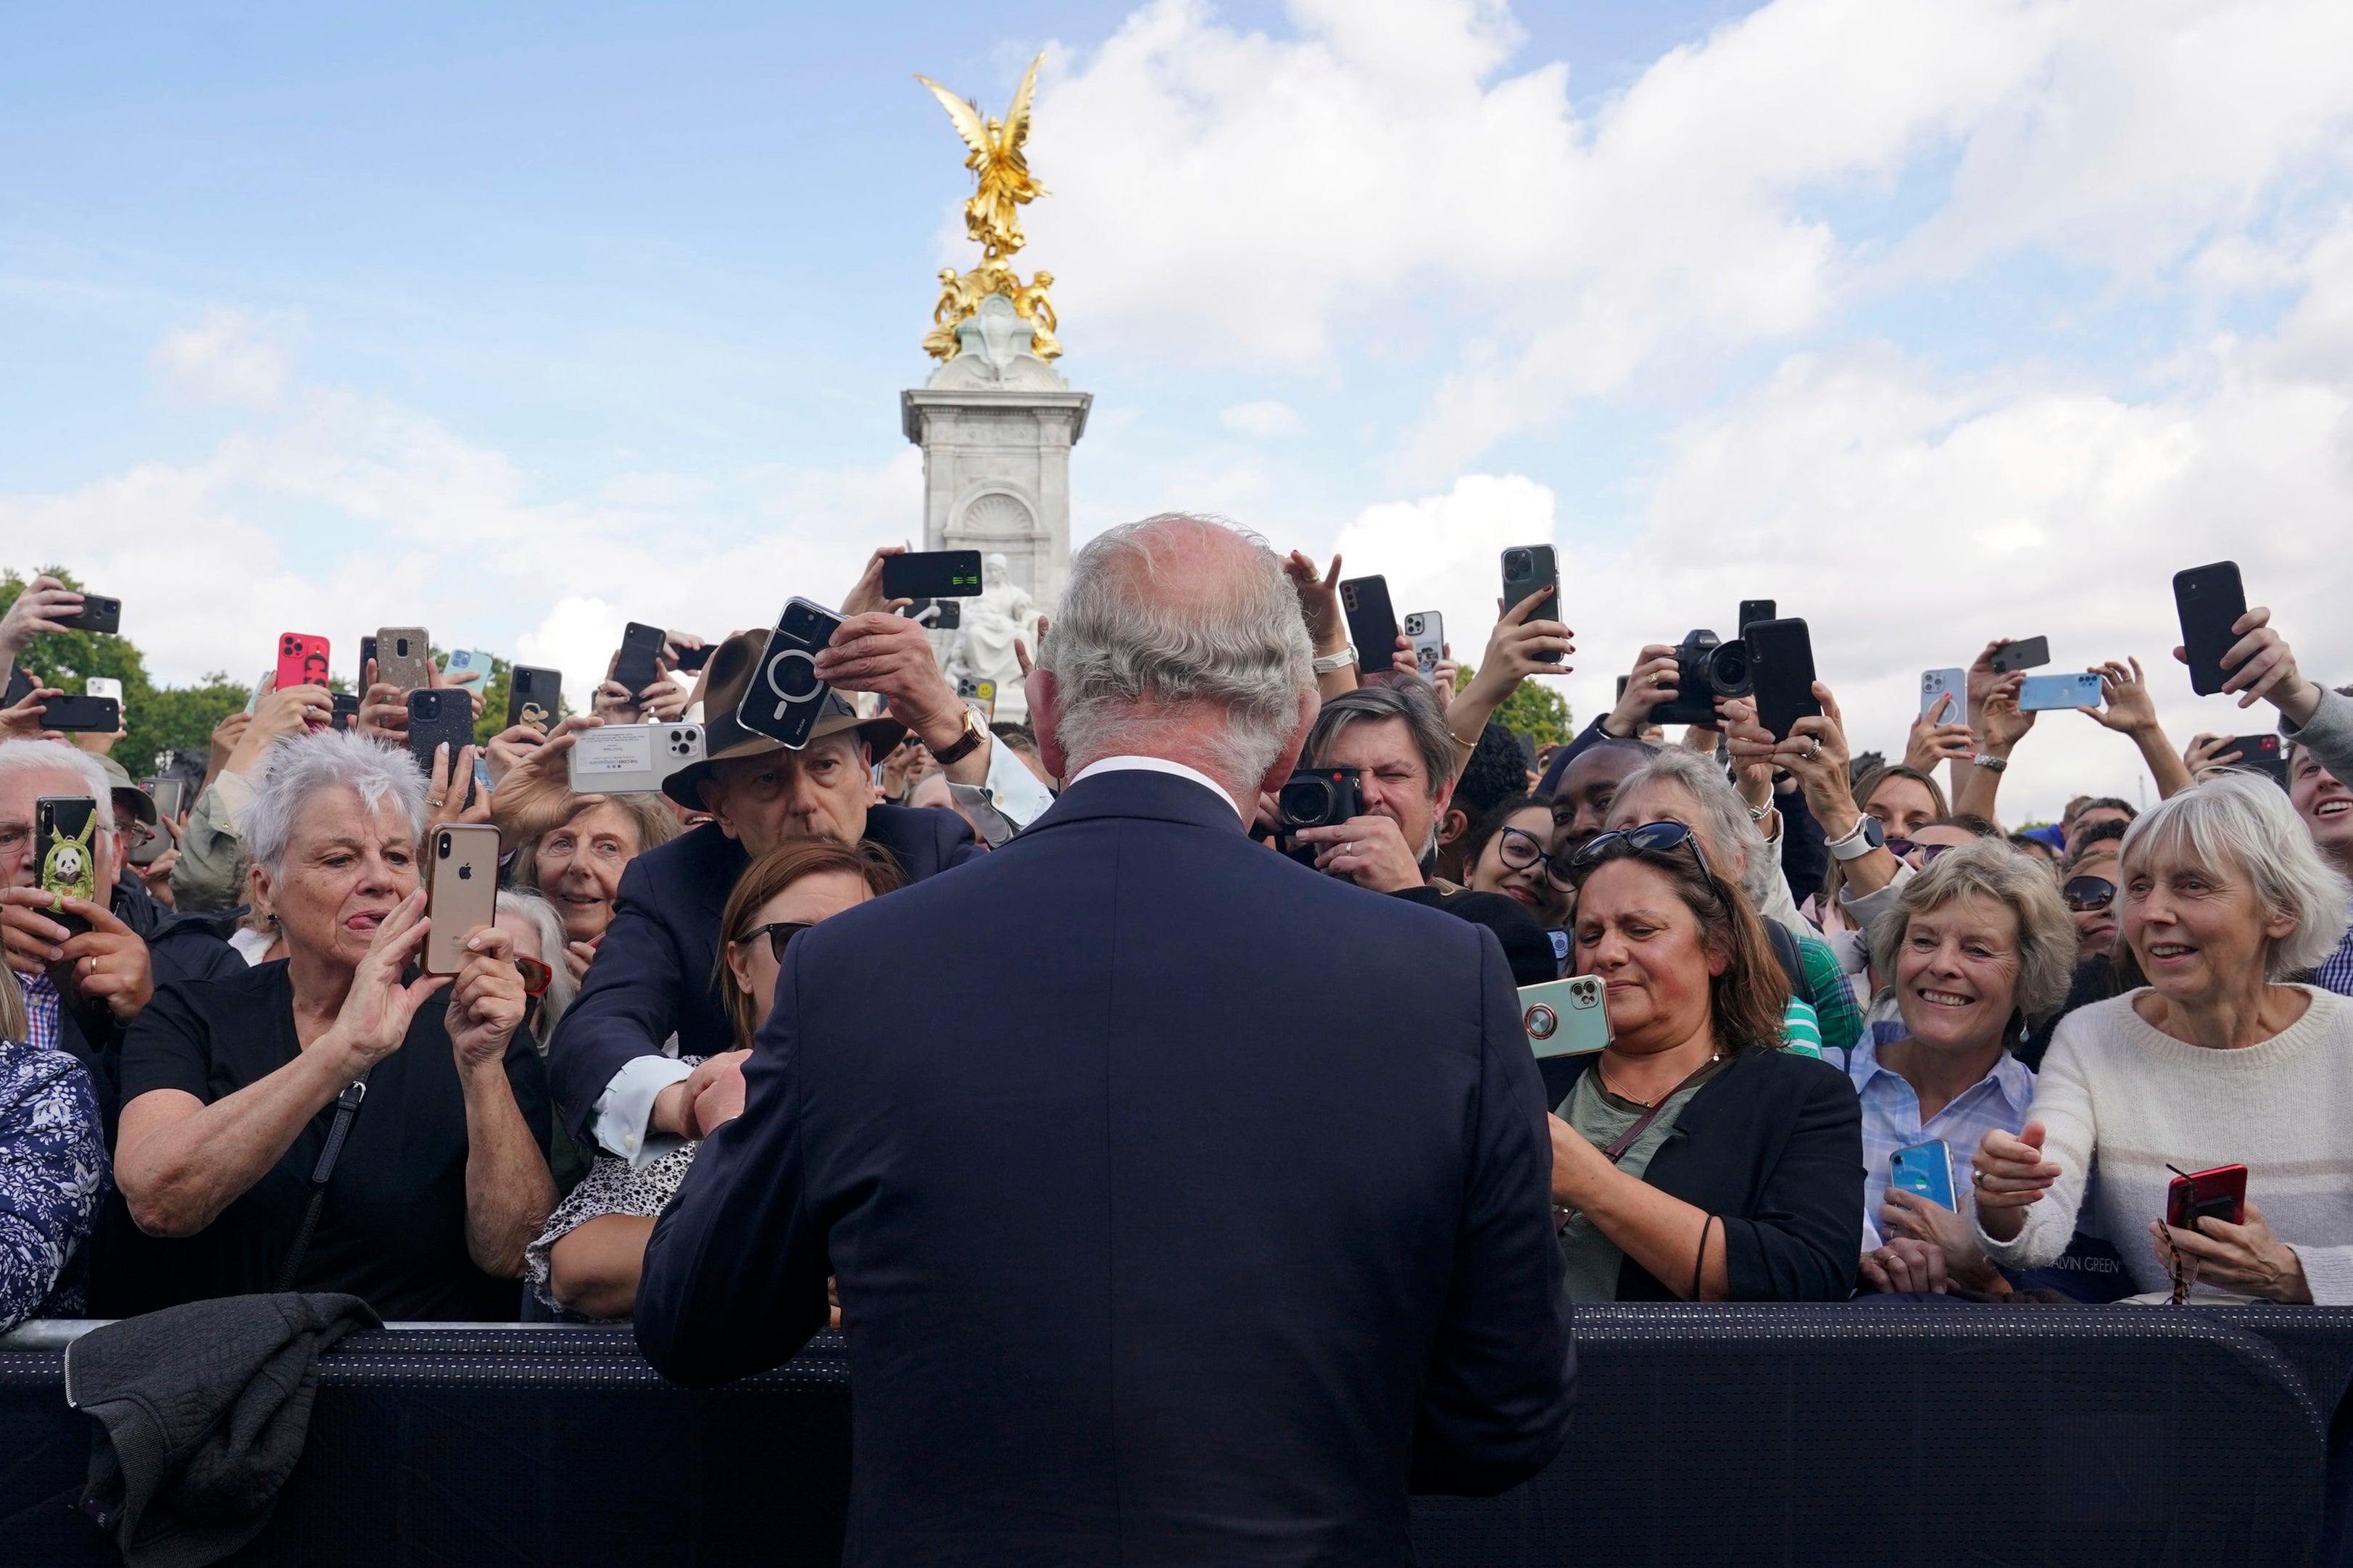 The King greets well-wishers as he walks by the gates of Buckingham Palace on Friday